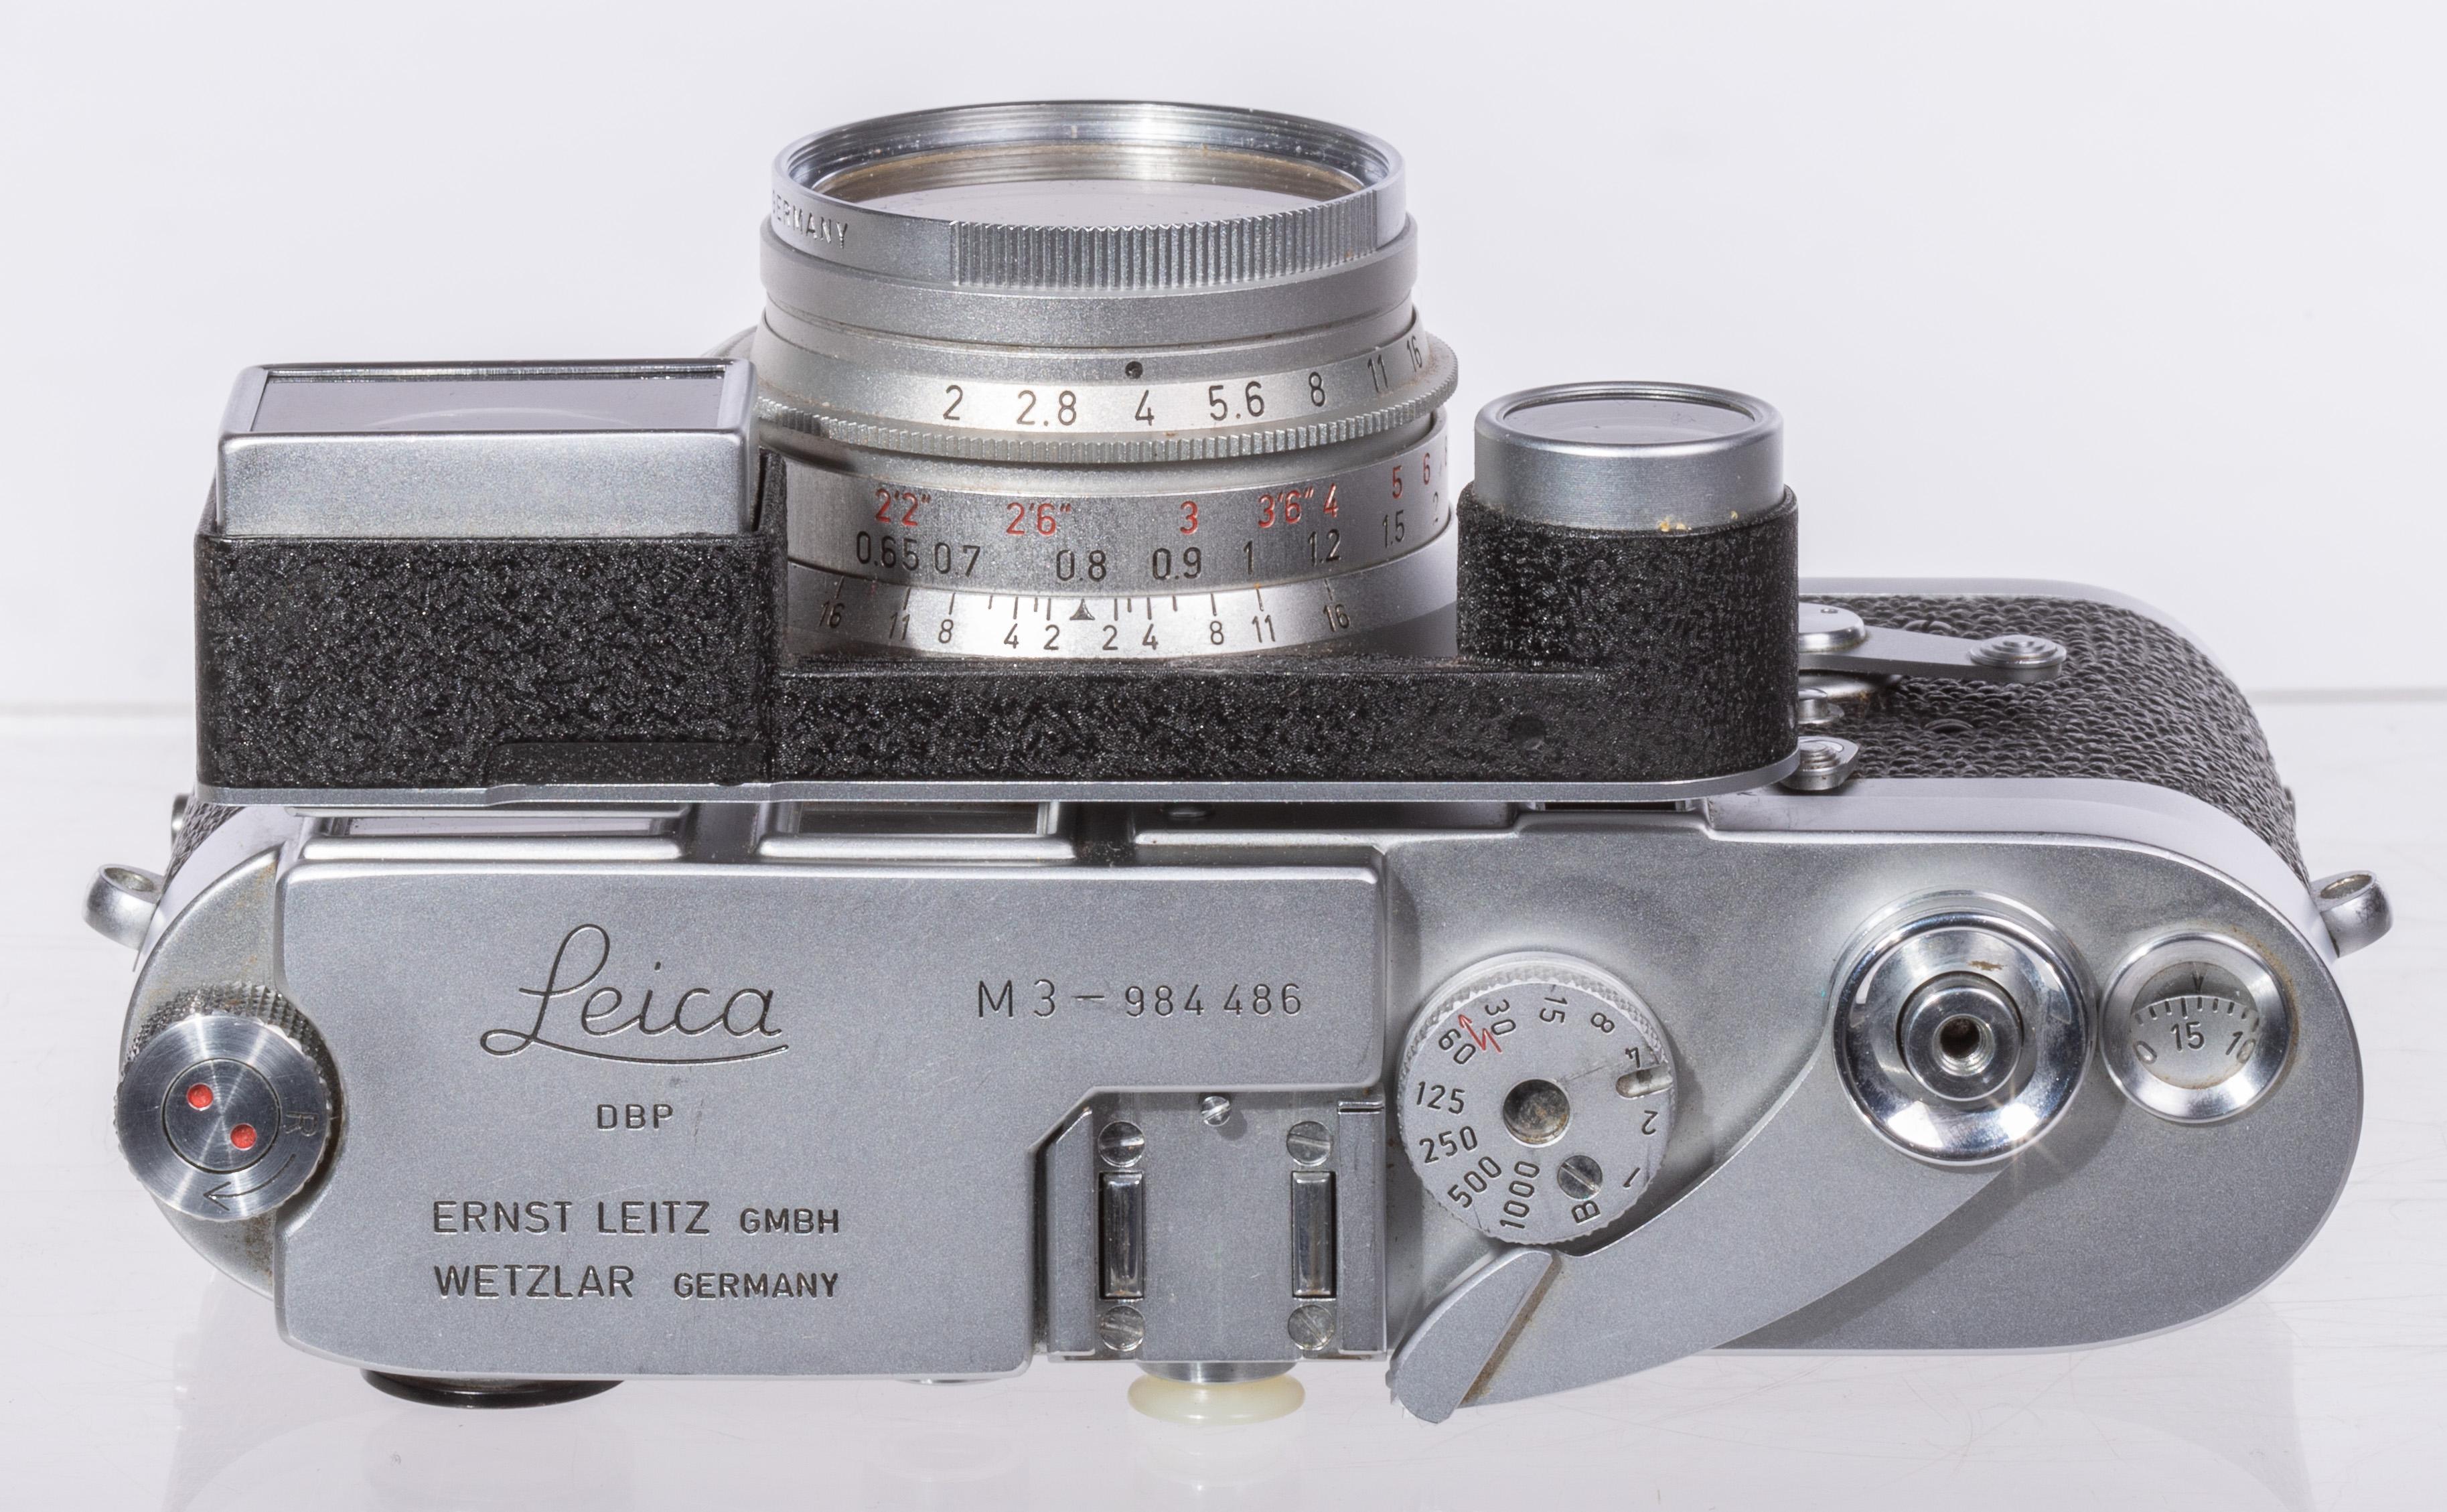 Leica DBP M3 35mm Camera and Lens